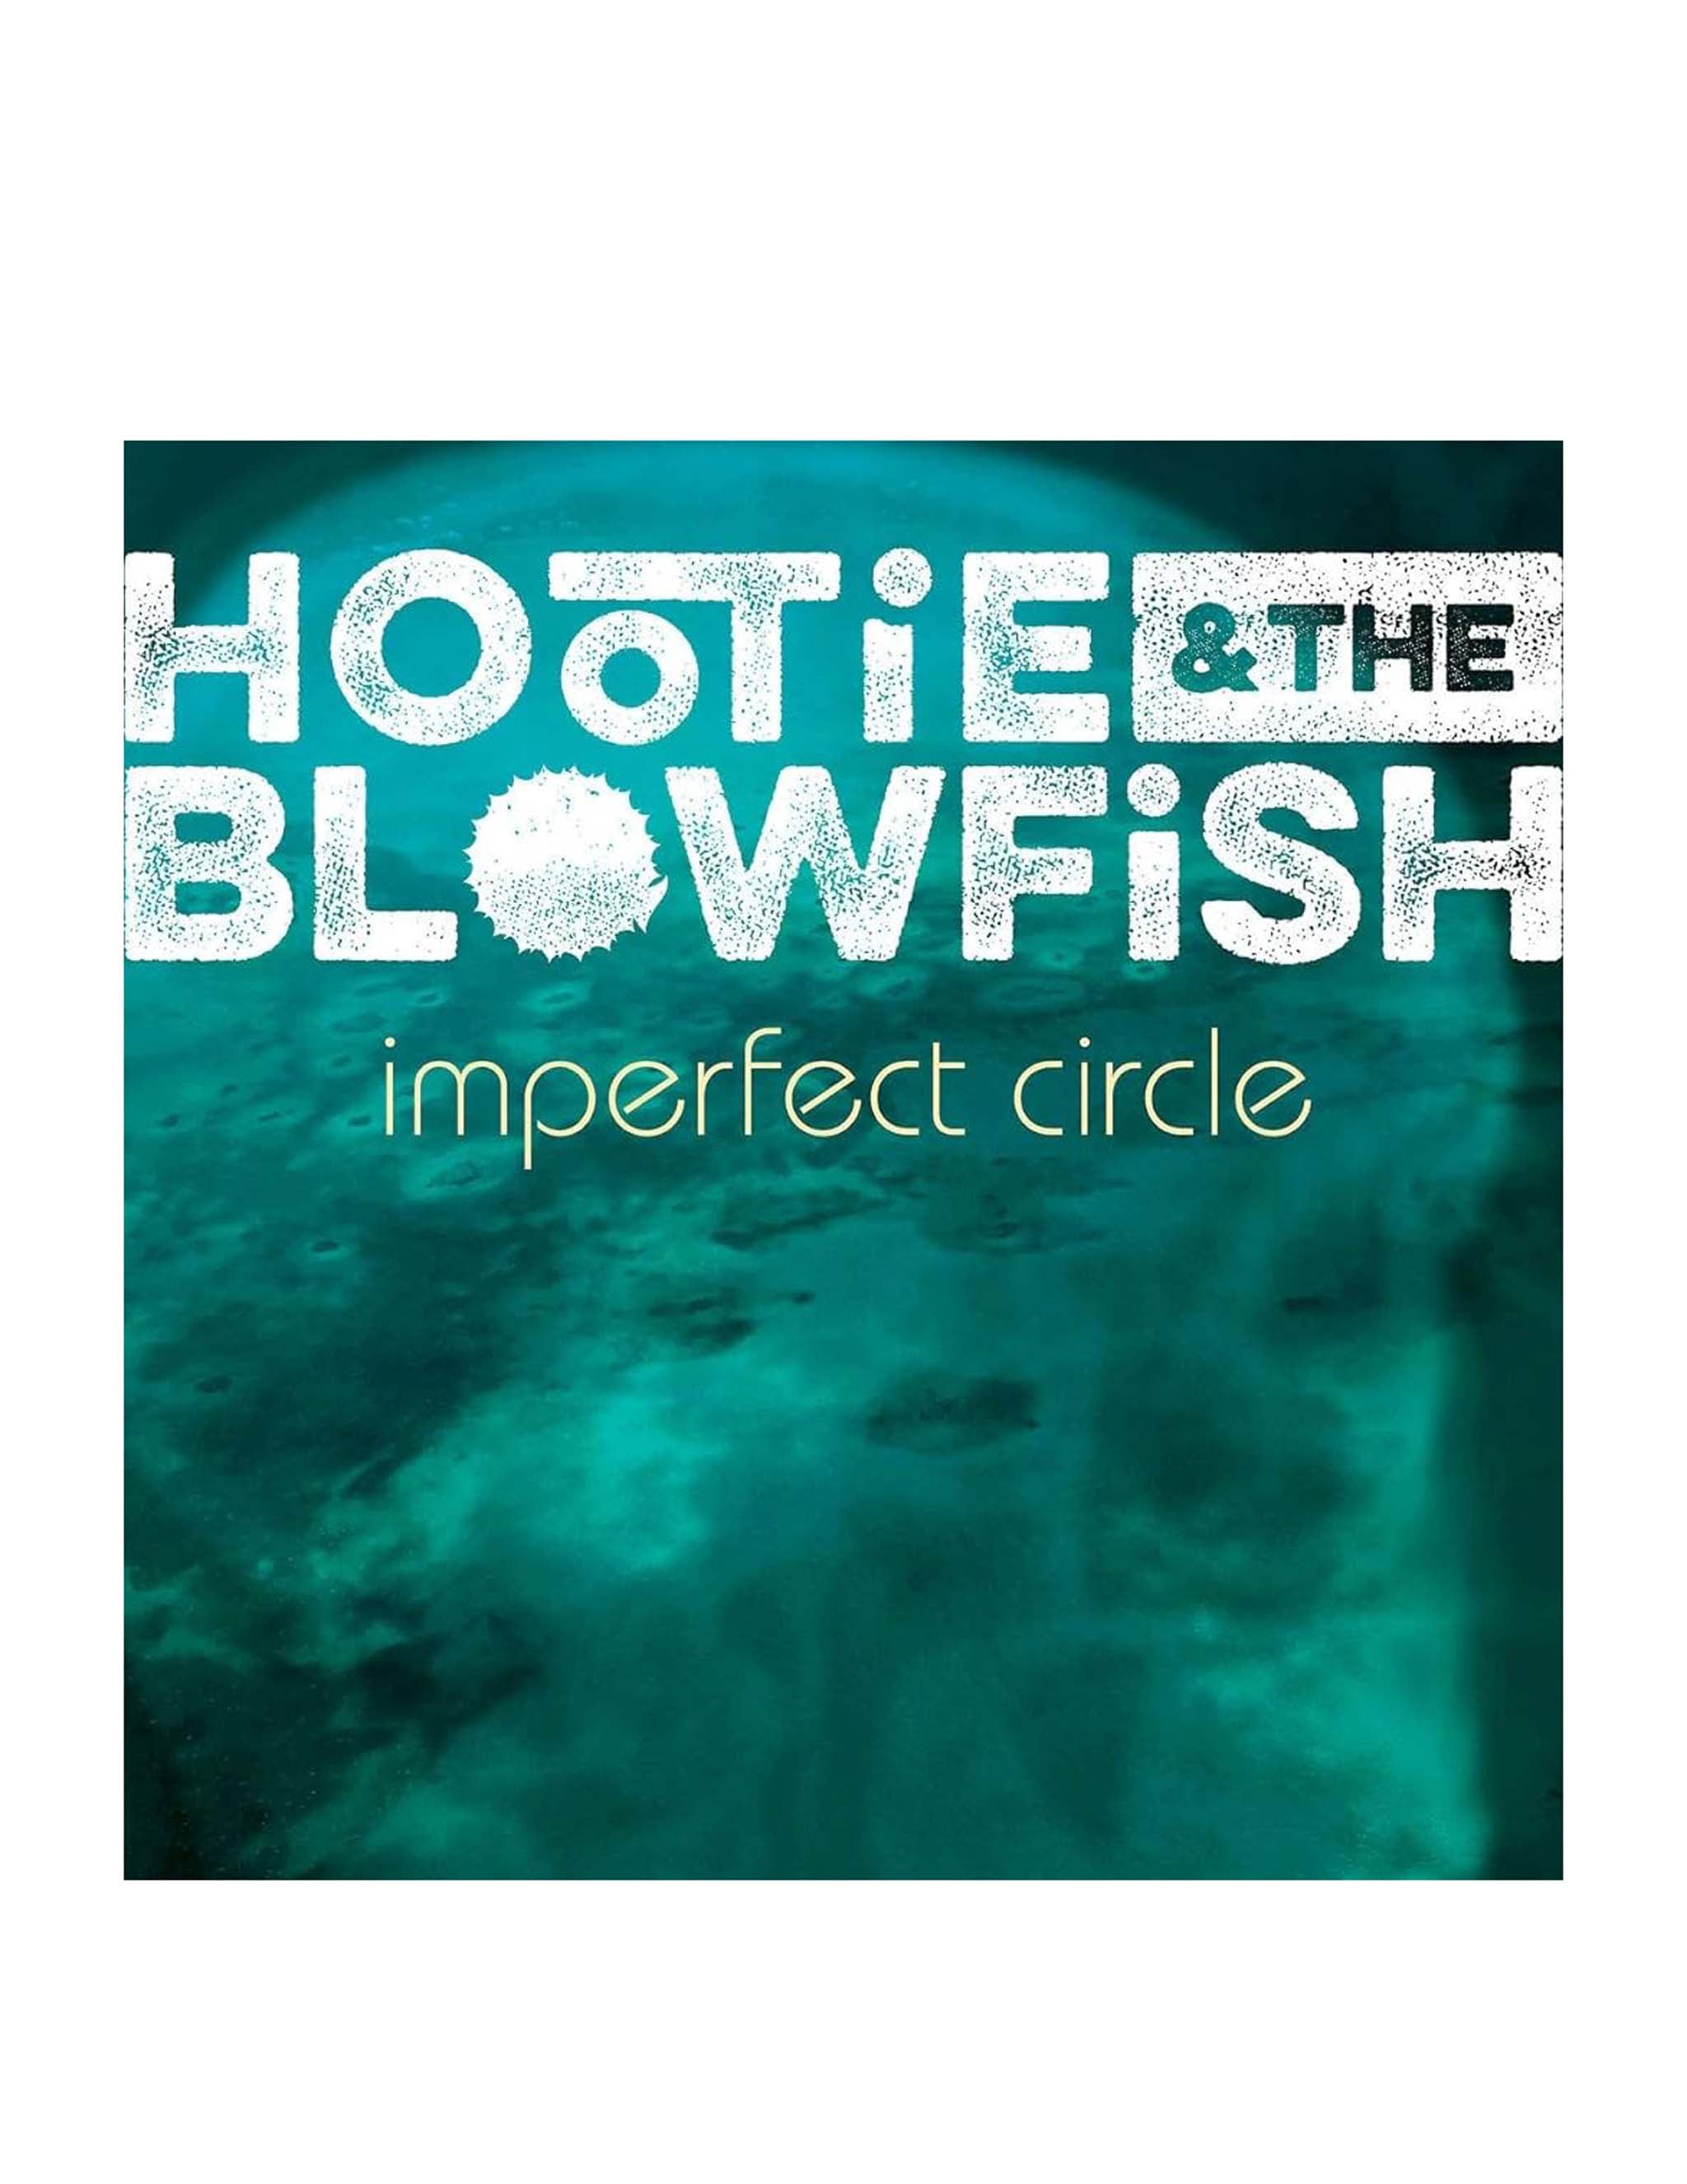 Hootie & The Blowfish: Imperfect Circle (LP)